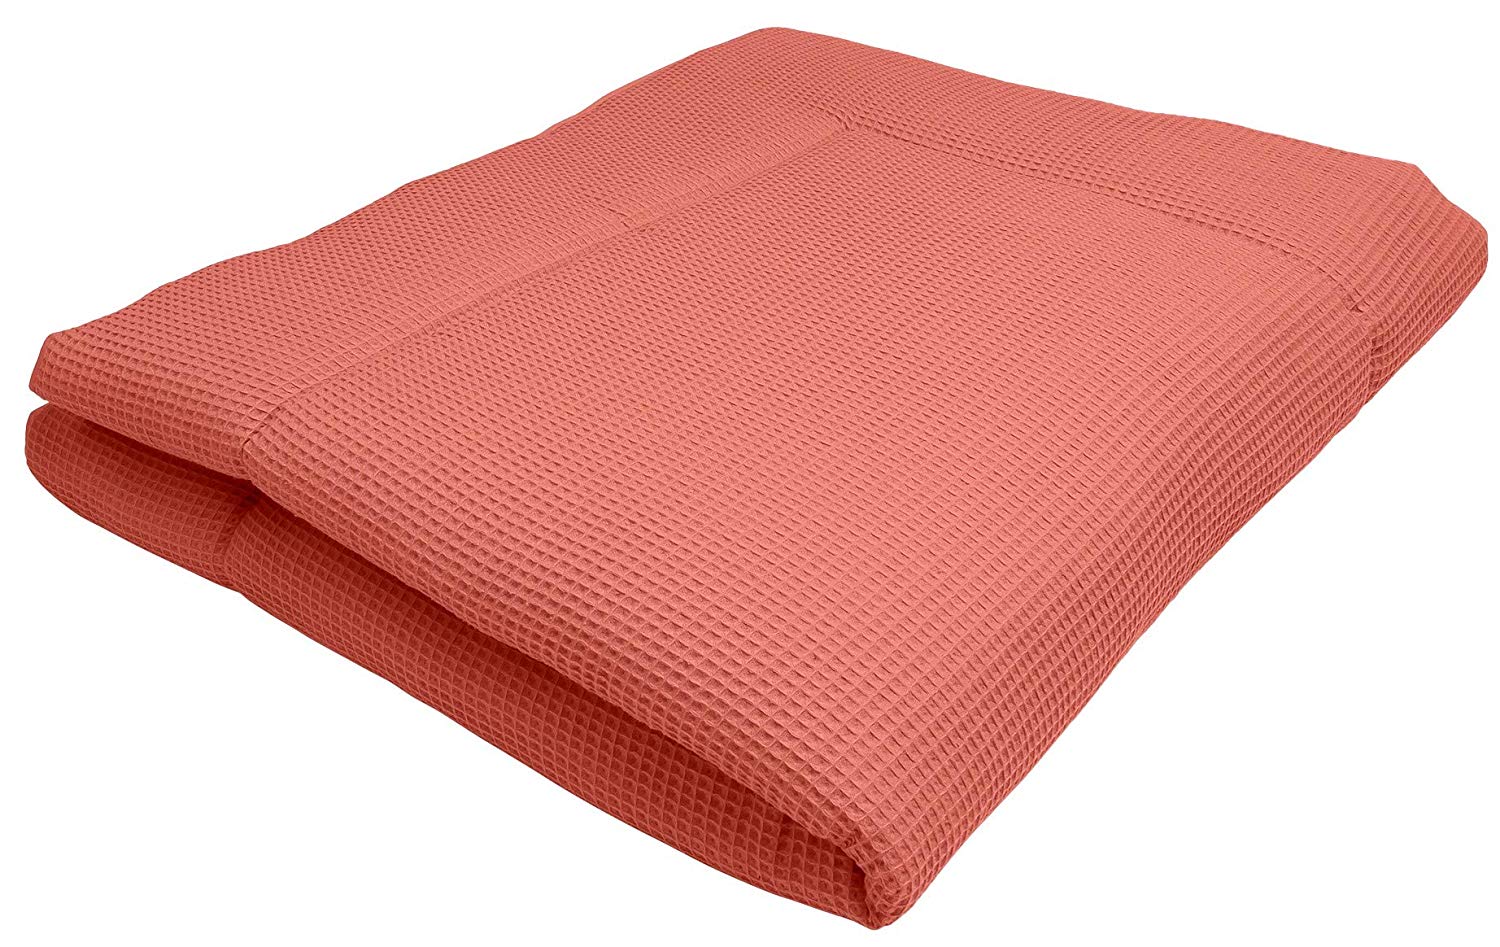 Ideenreich Ideenreich 2480 Baby Crawling Blanket King Size Salmon 135 x 150 cm Ideal as Play Mat and Playpen Insert Pink